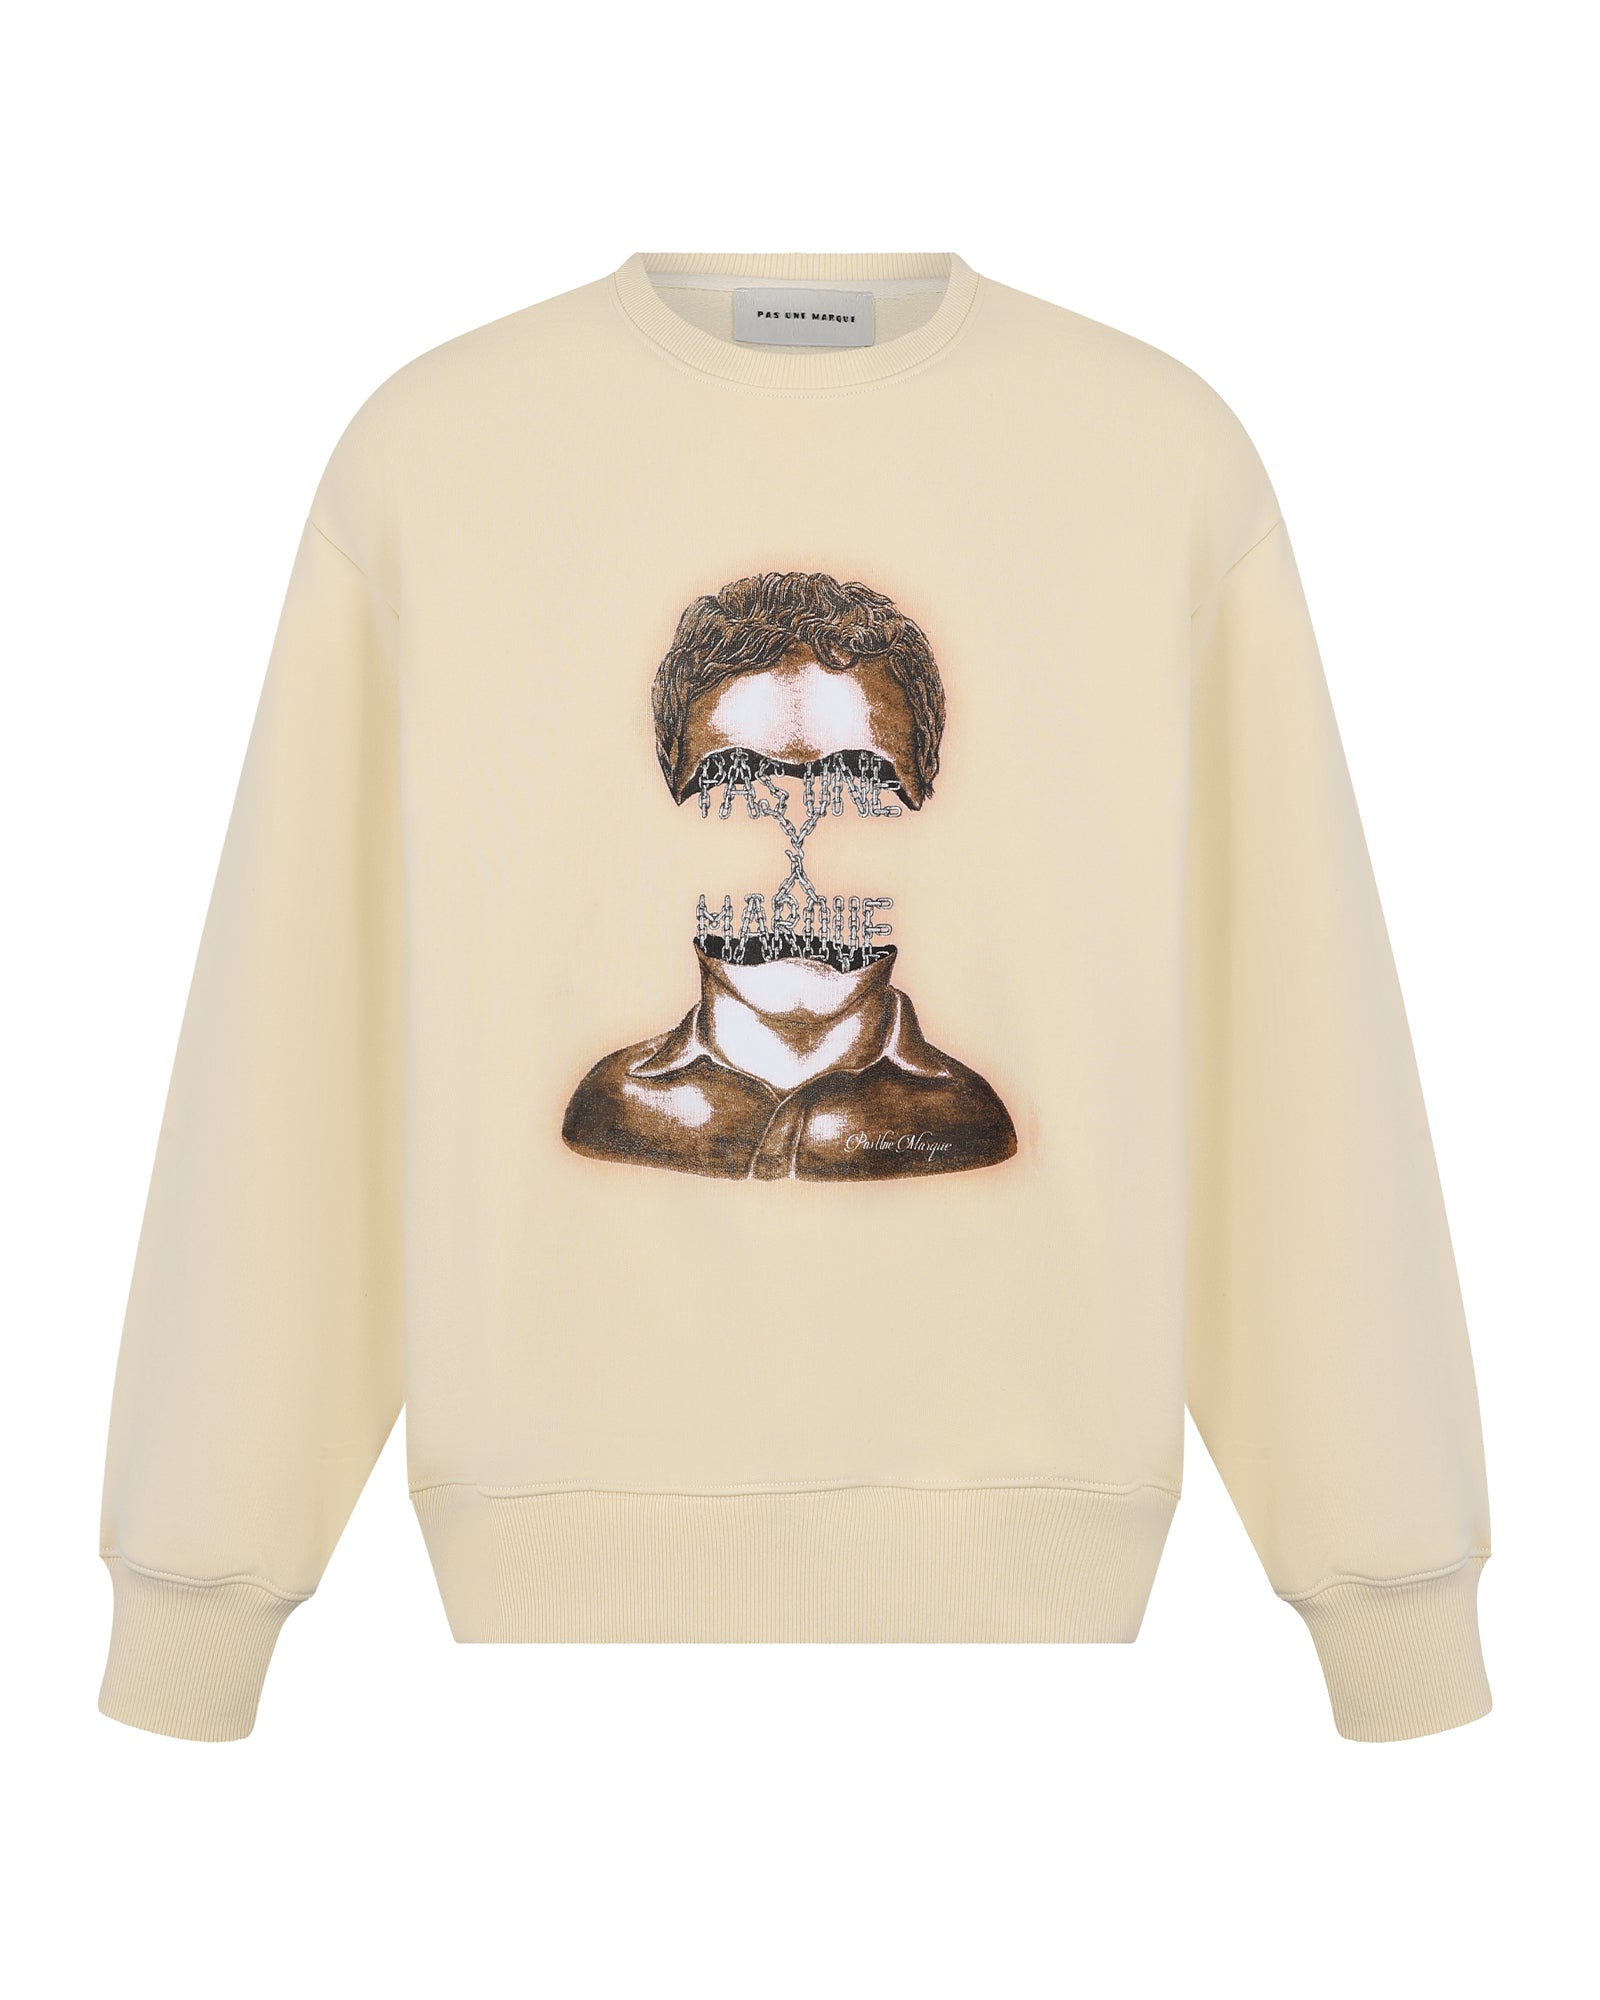 Curiously Strong Minds Sweatshirt Cream